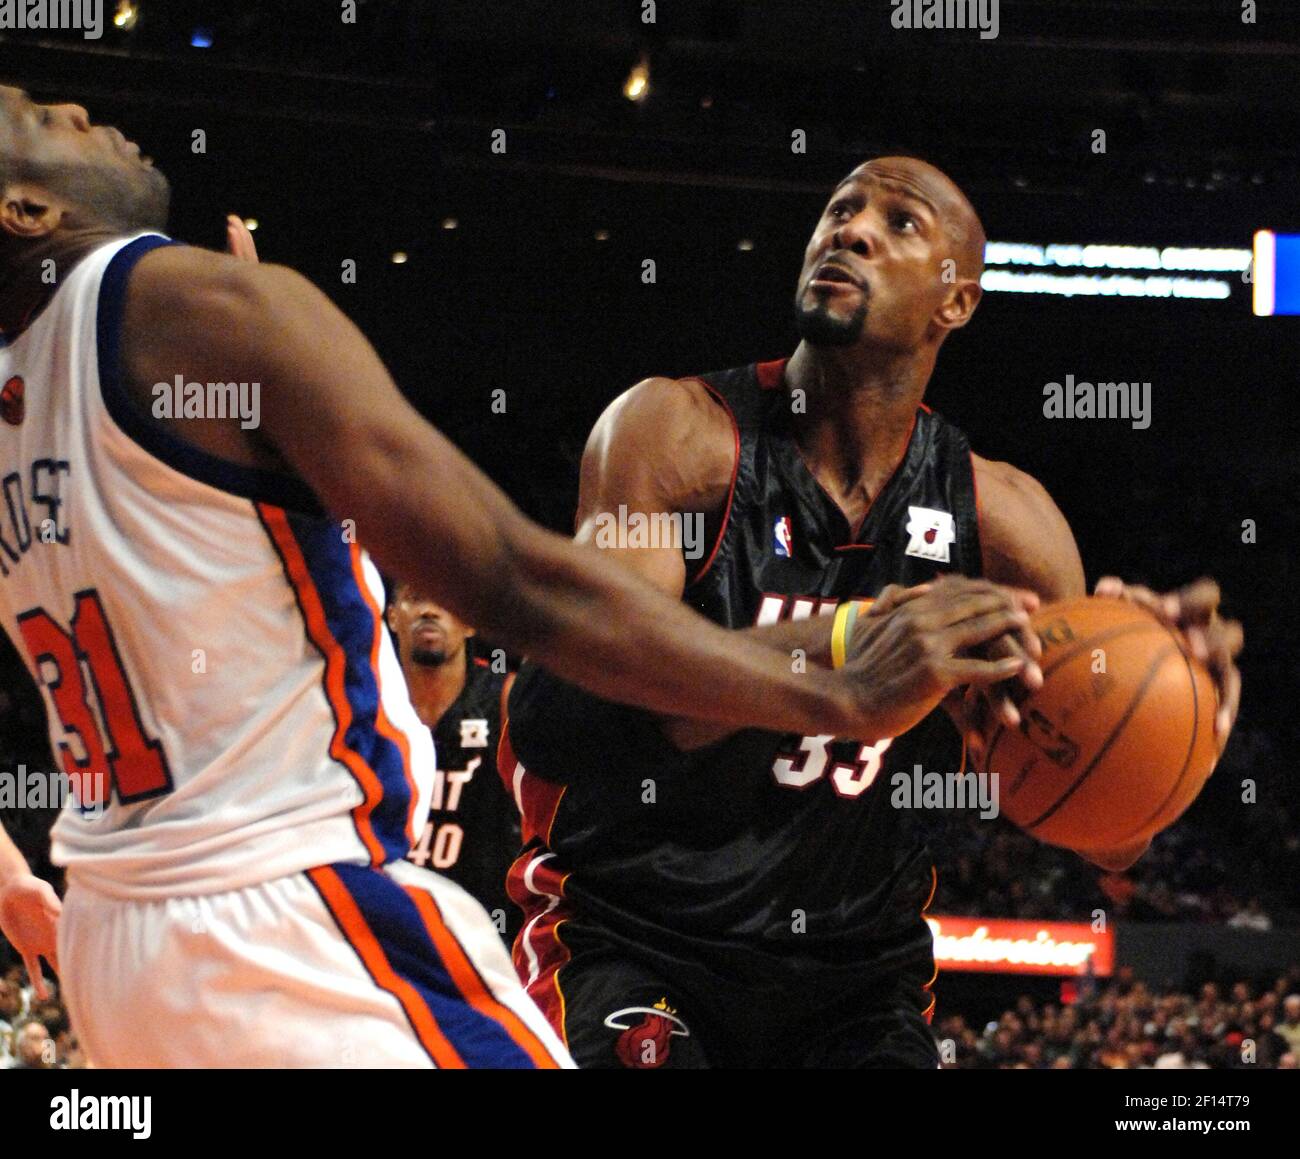 The New York Knicks' Malik Rose (left) knocks the ball from the Miami Heat's Alonzo Mourning (33) in the third quarter. The Heat defeated the Knicks, 75-72, at Madison Square Garden in New York City, Sunday, November 11, 2007. (Photo by J. Conrad Williams Jr./Newsday/MCT/Sipa USA) Stock Photo